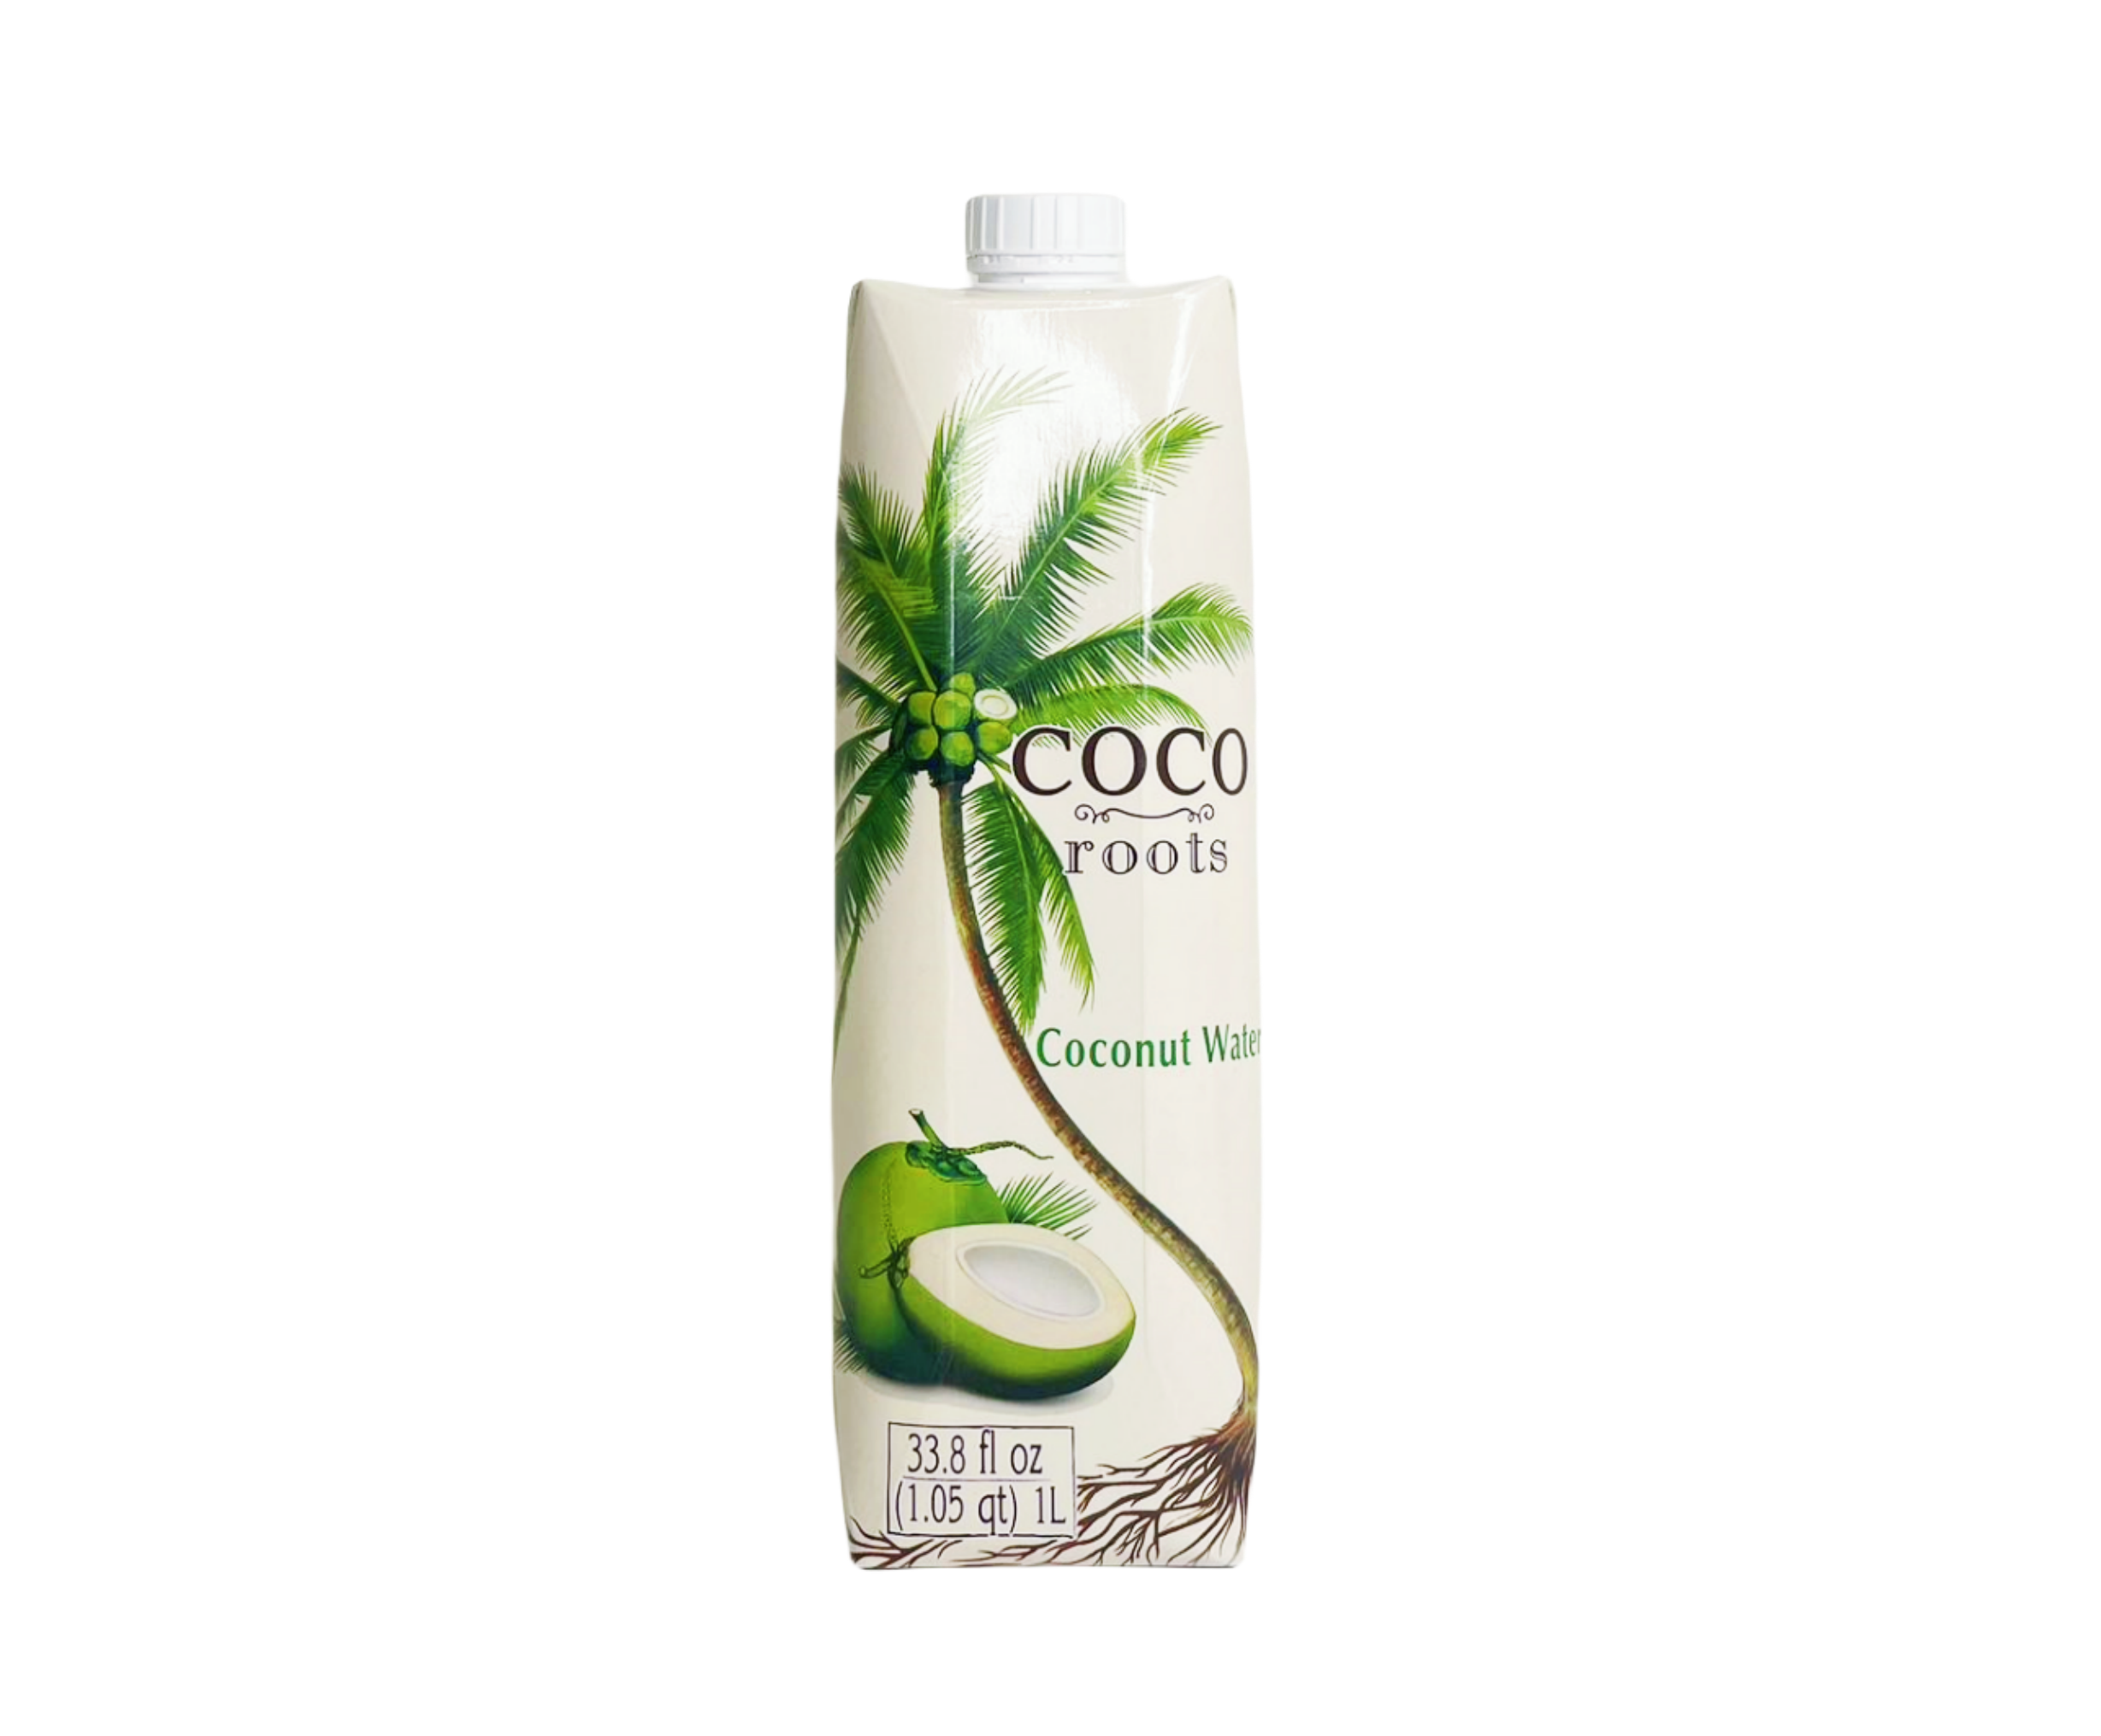 Coconut Water Pure UHT 1Liter Coco Roots Thailand 